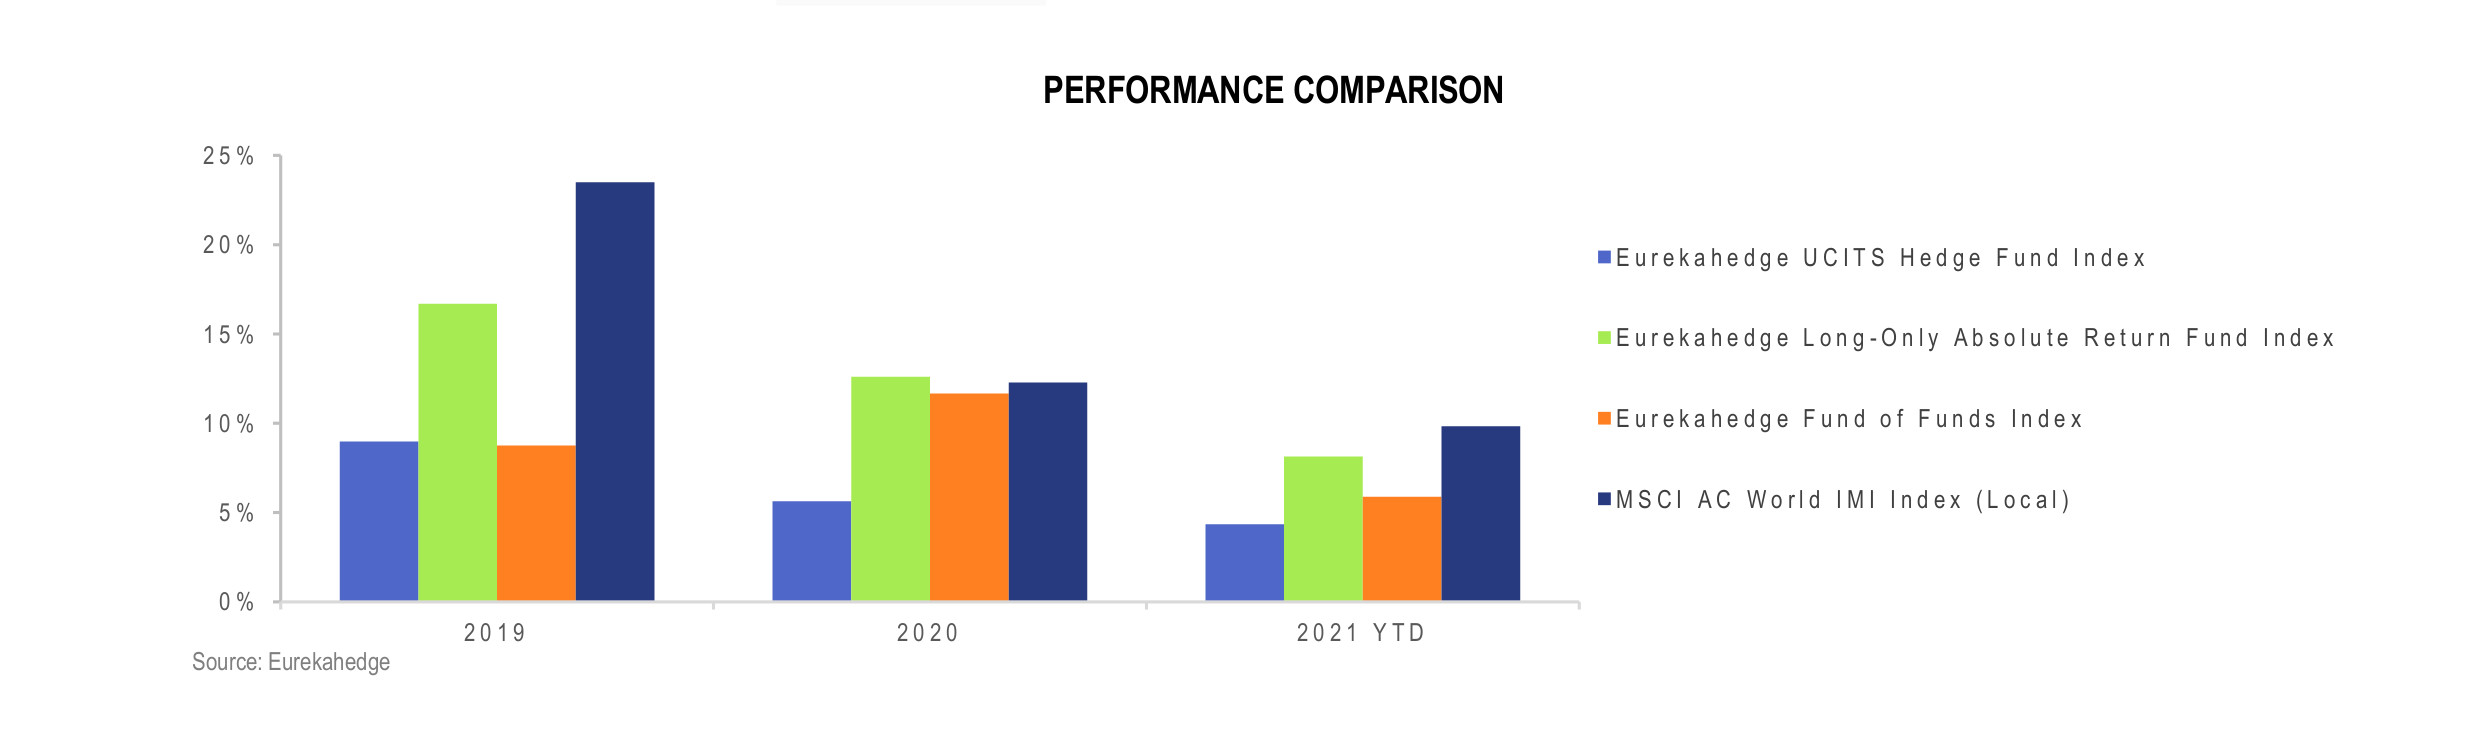 UCITS Hedge Funds Infographic June 2021 - Performance Comparison